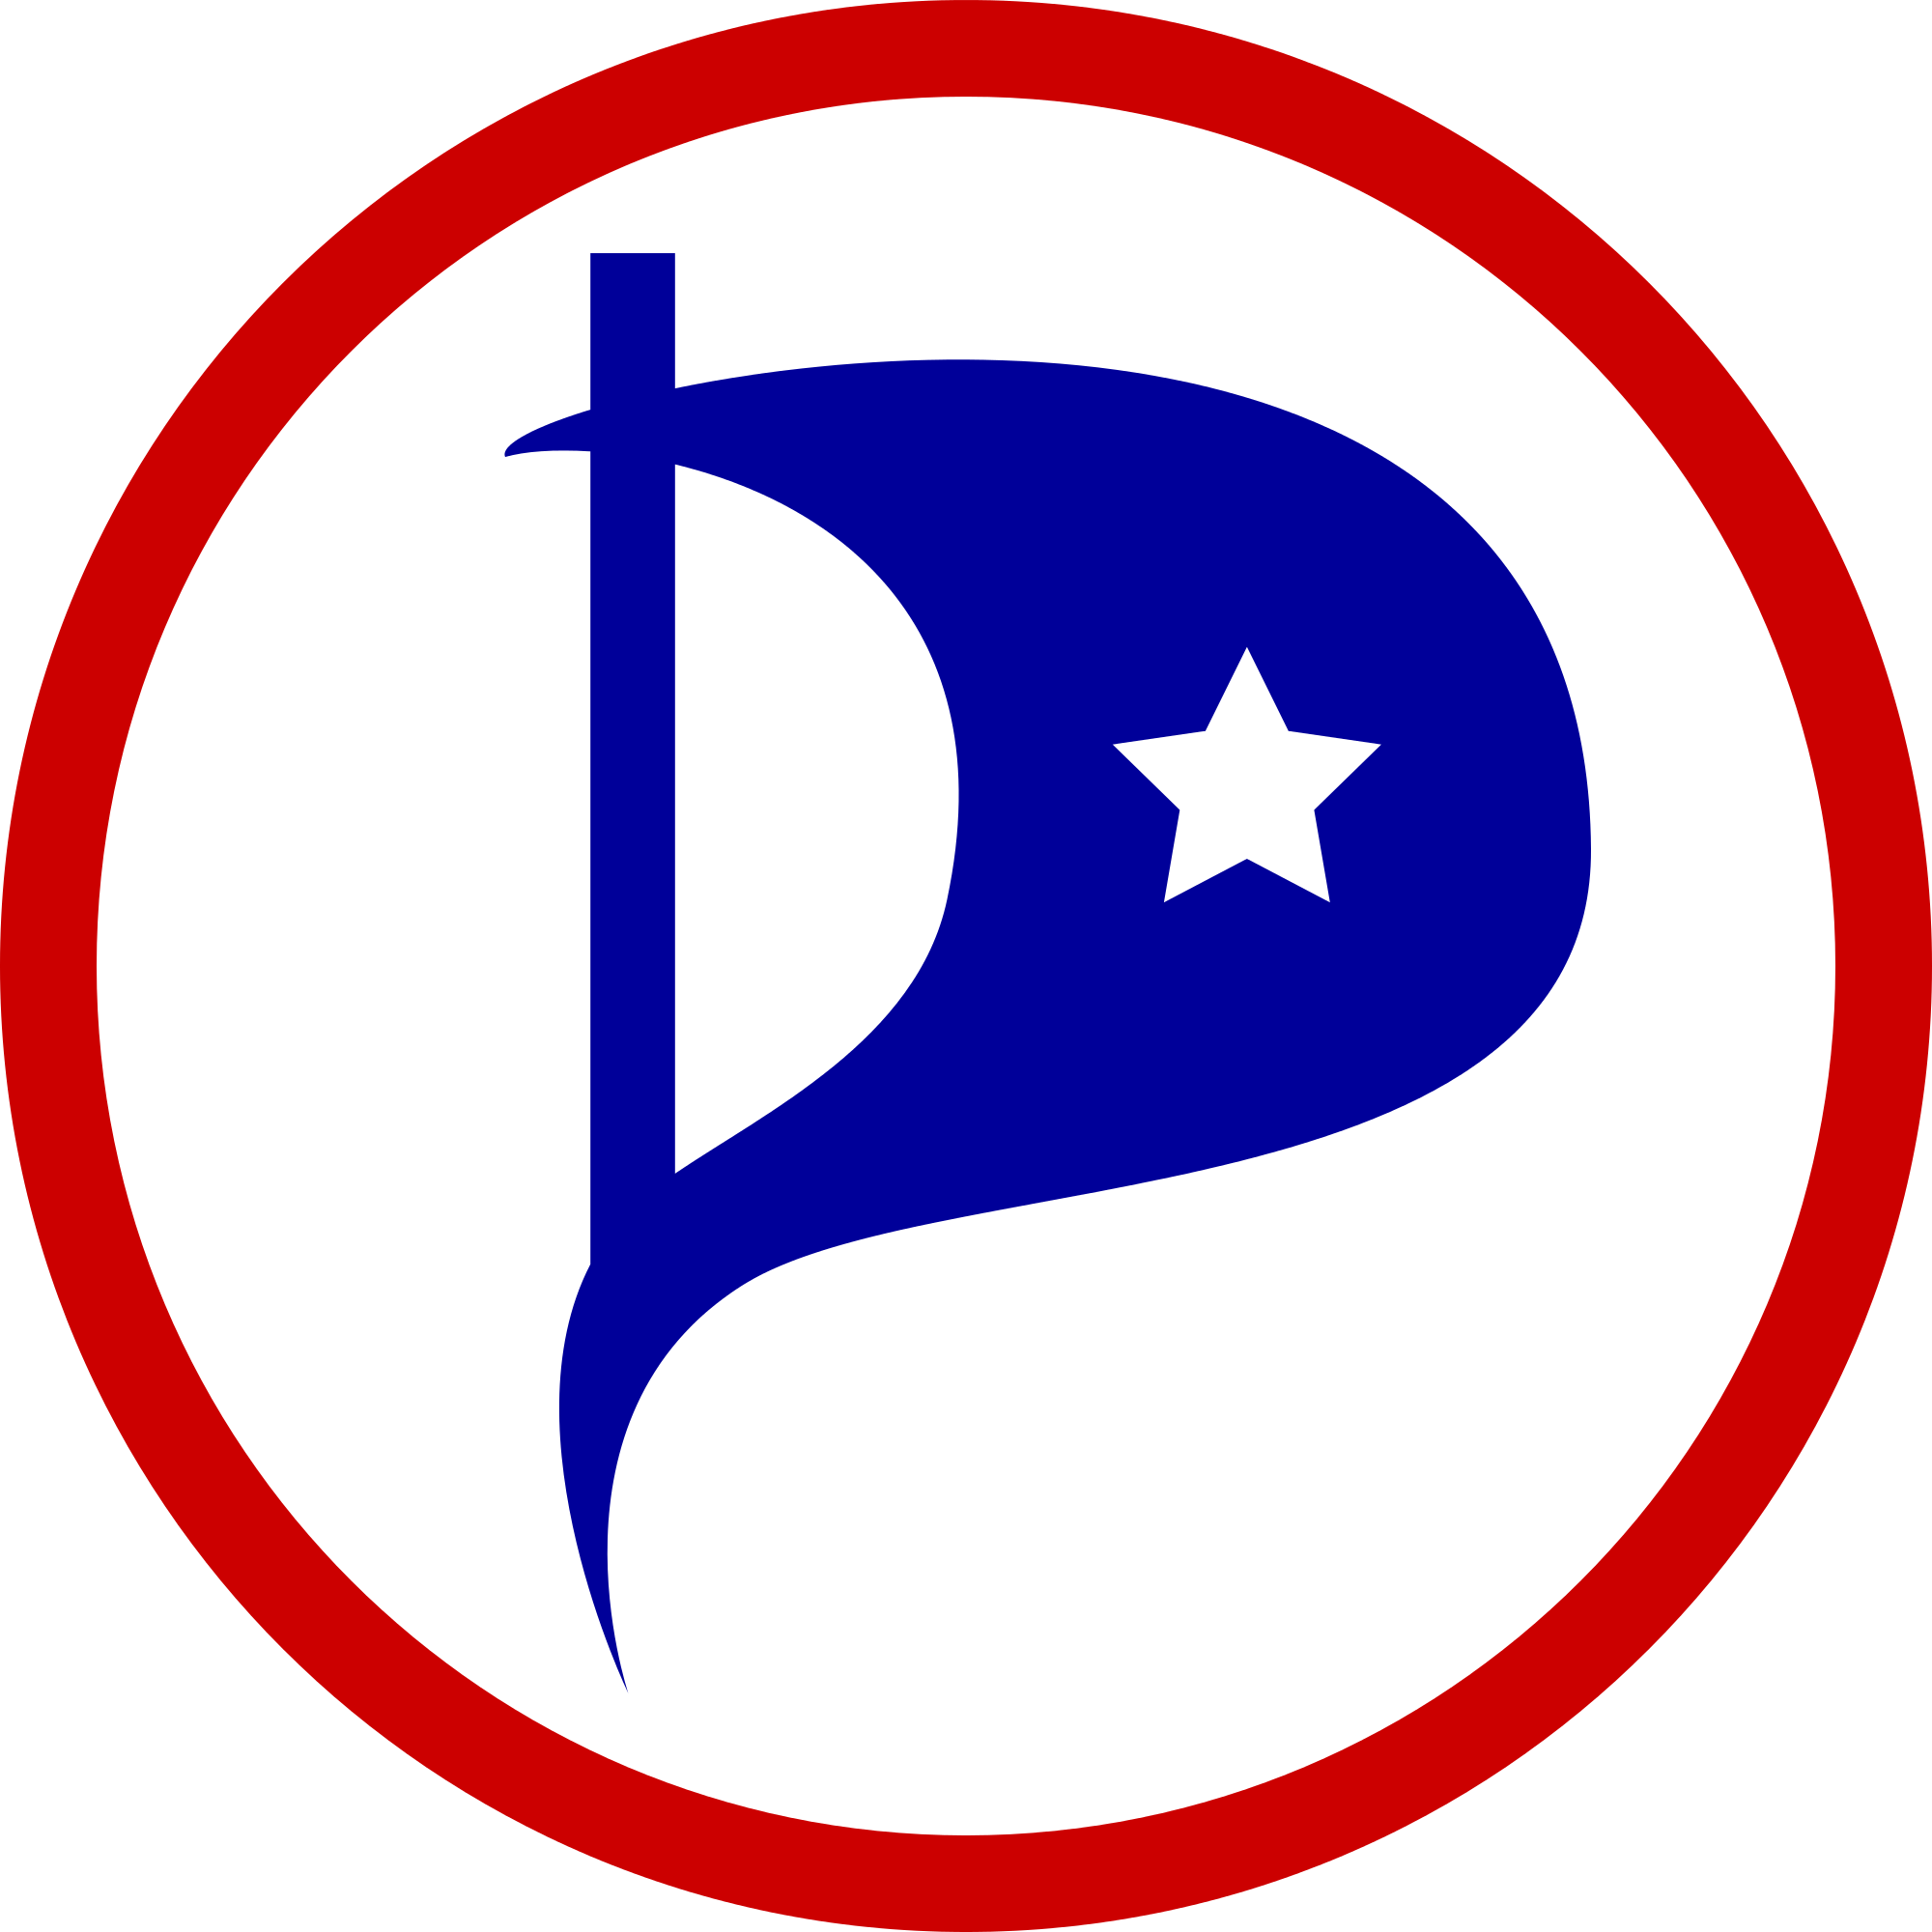 United States Pirate Party (2000x2000)